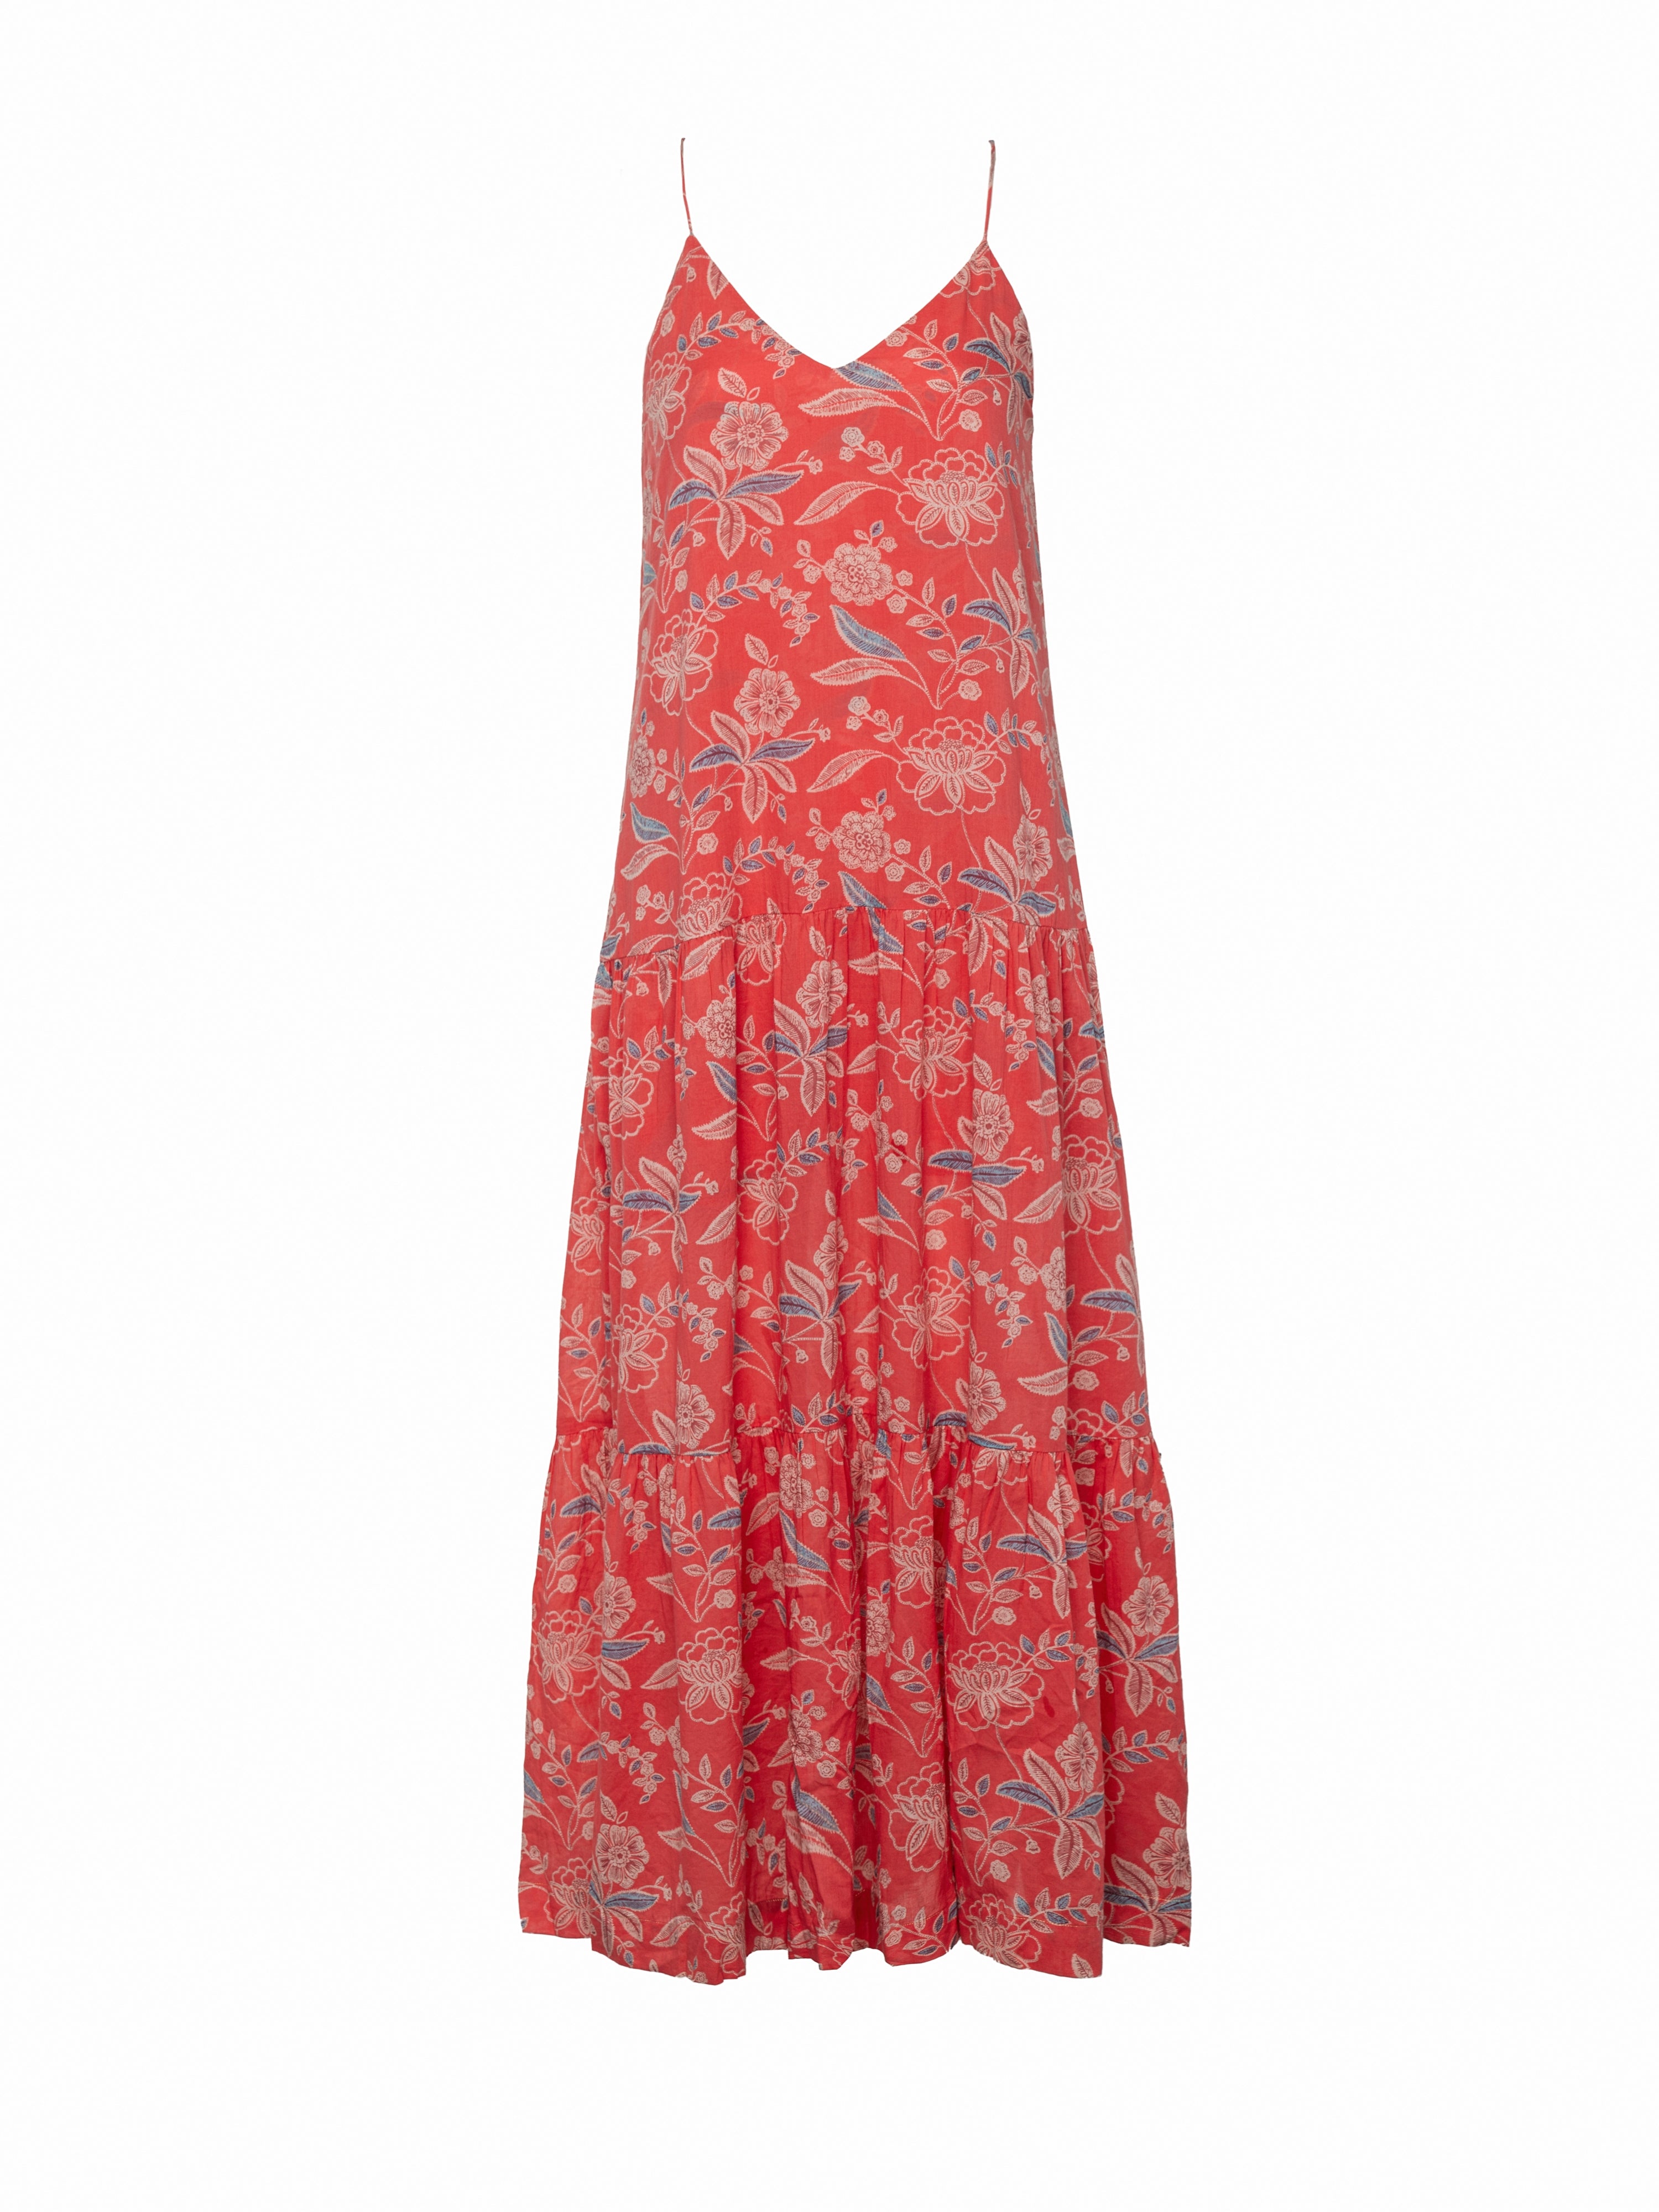 Artemisia Maxi Dress - Red Floral by Desert Queen